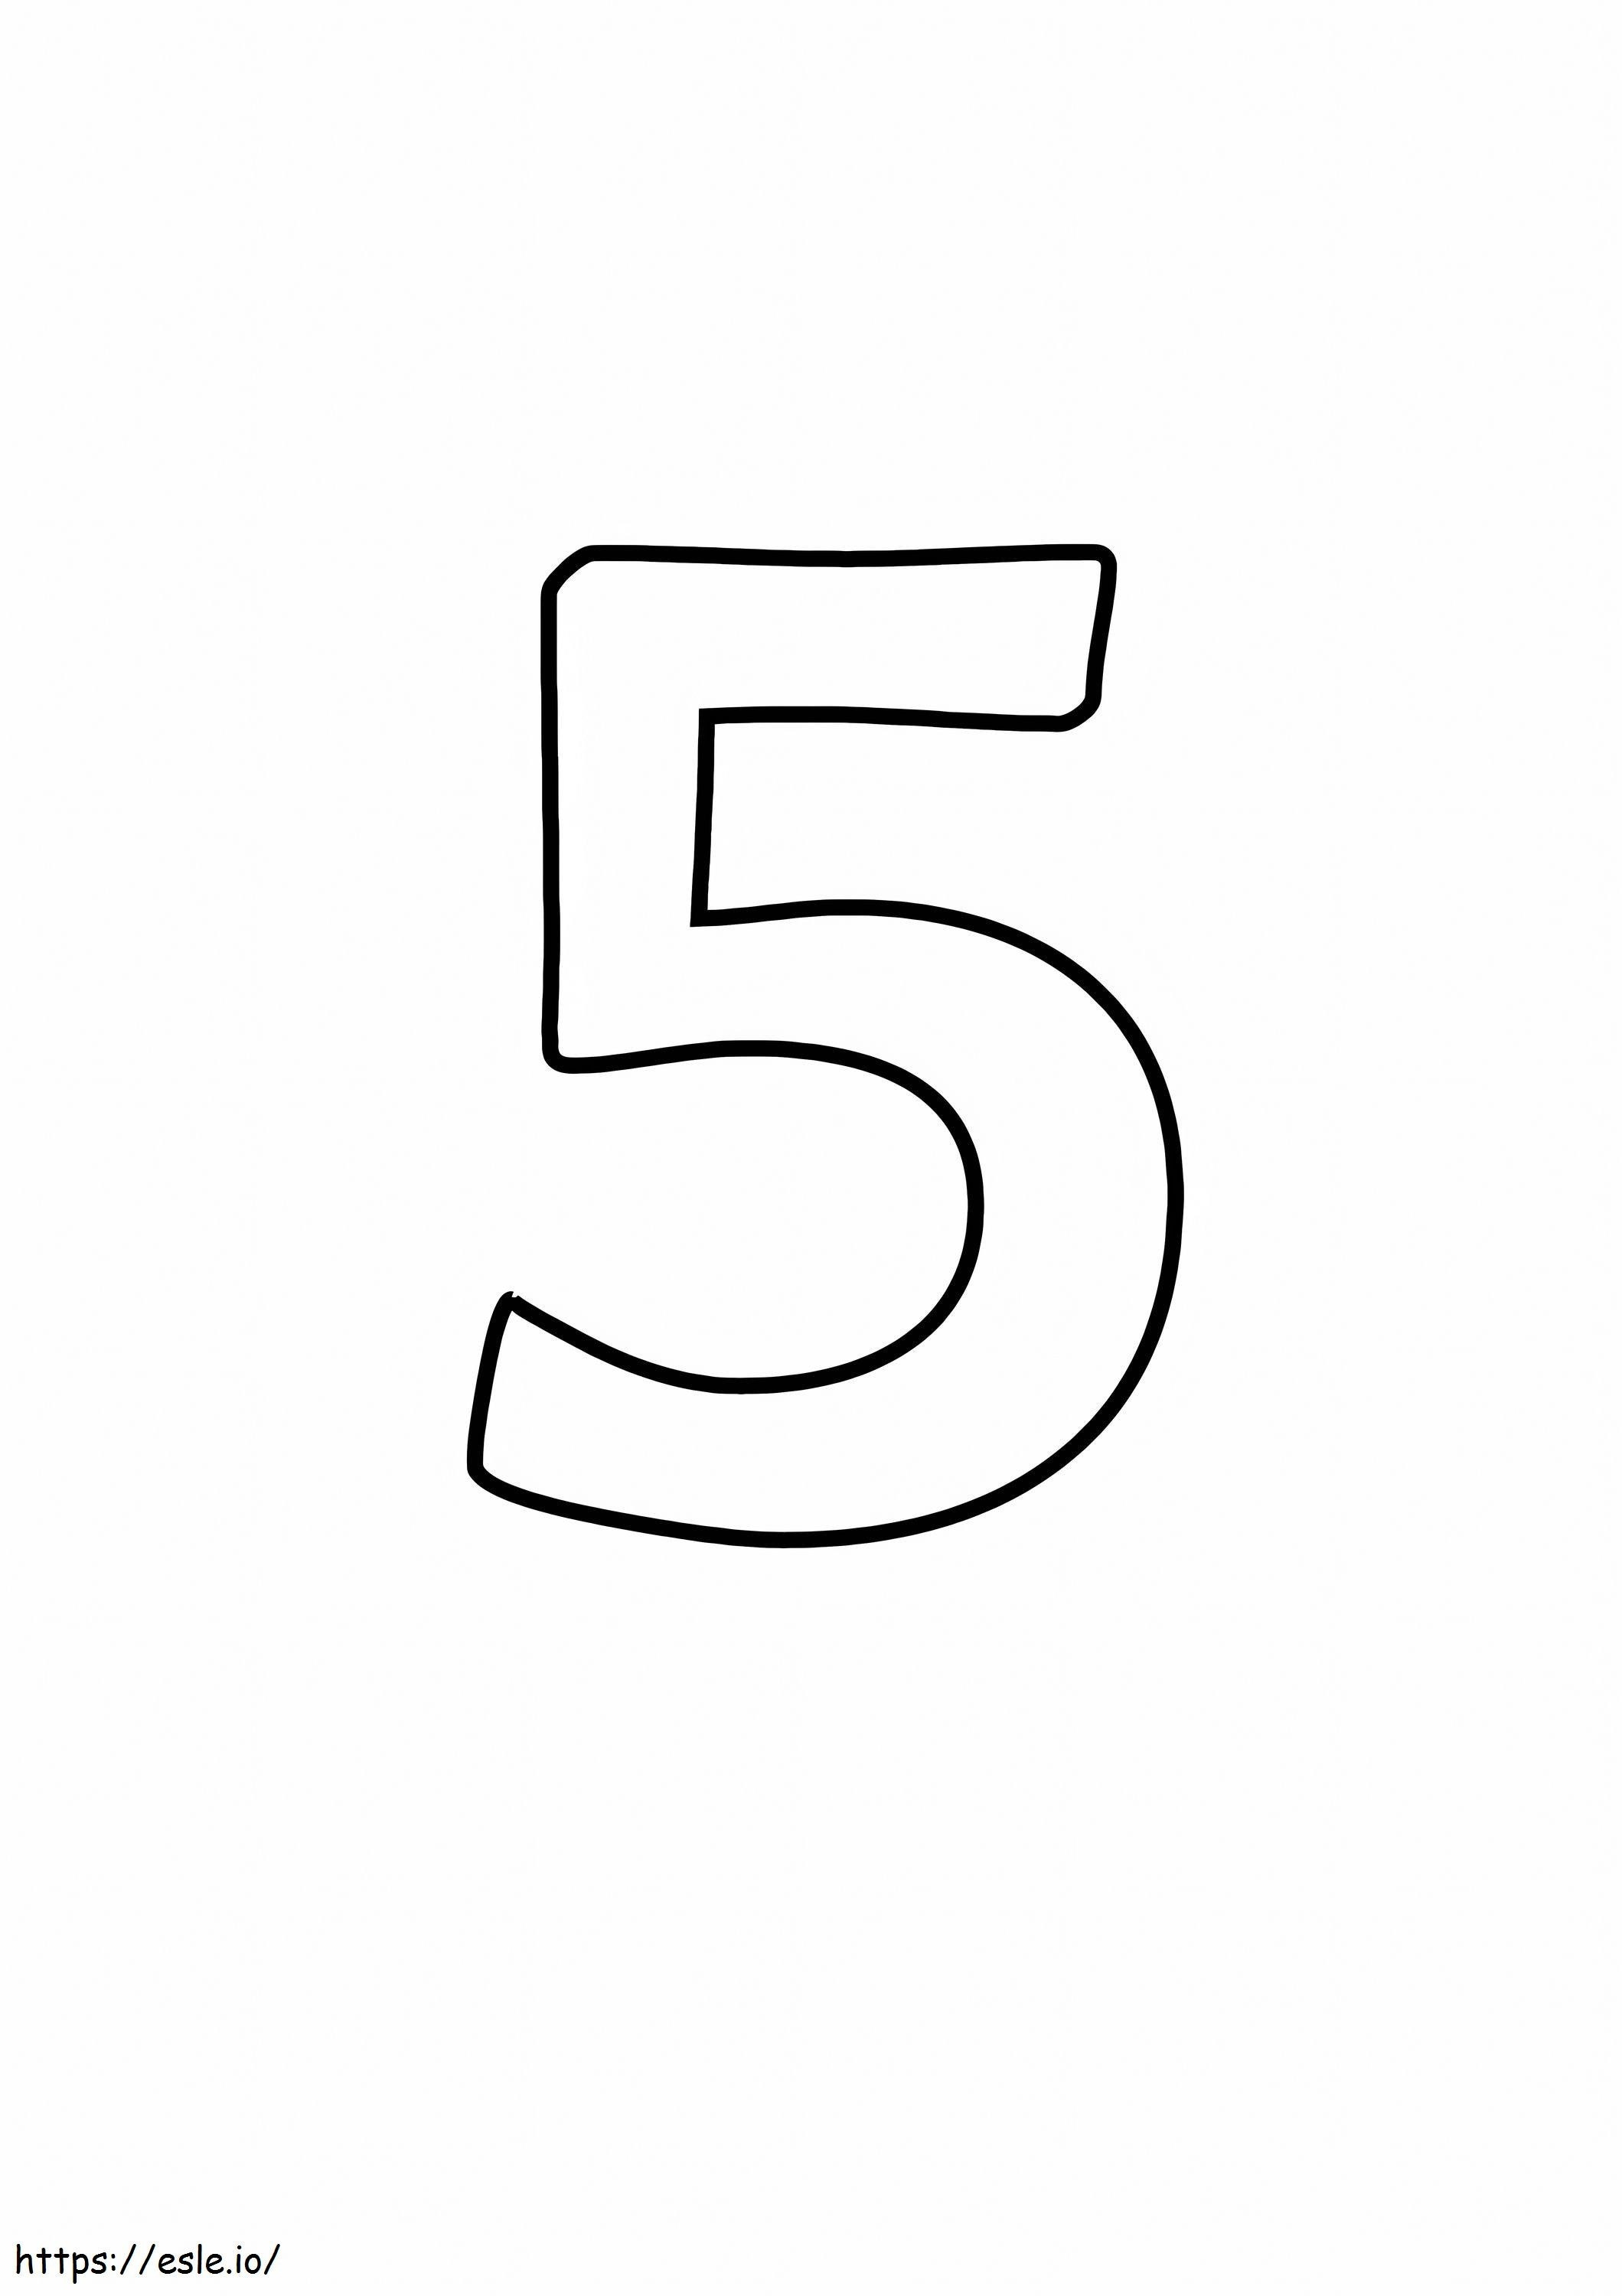 Basic Number 5 coloring page